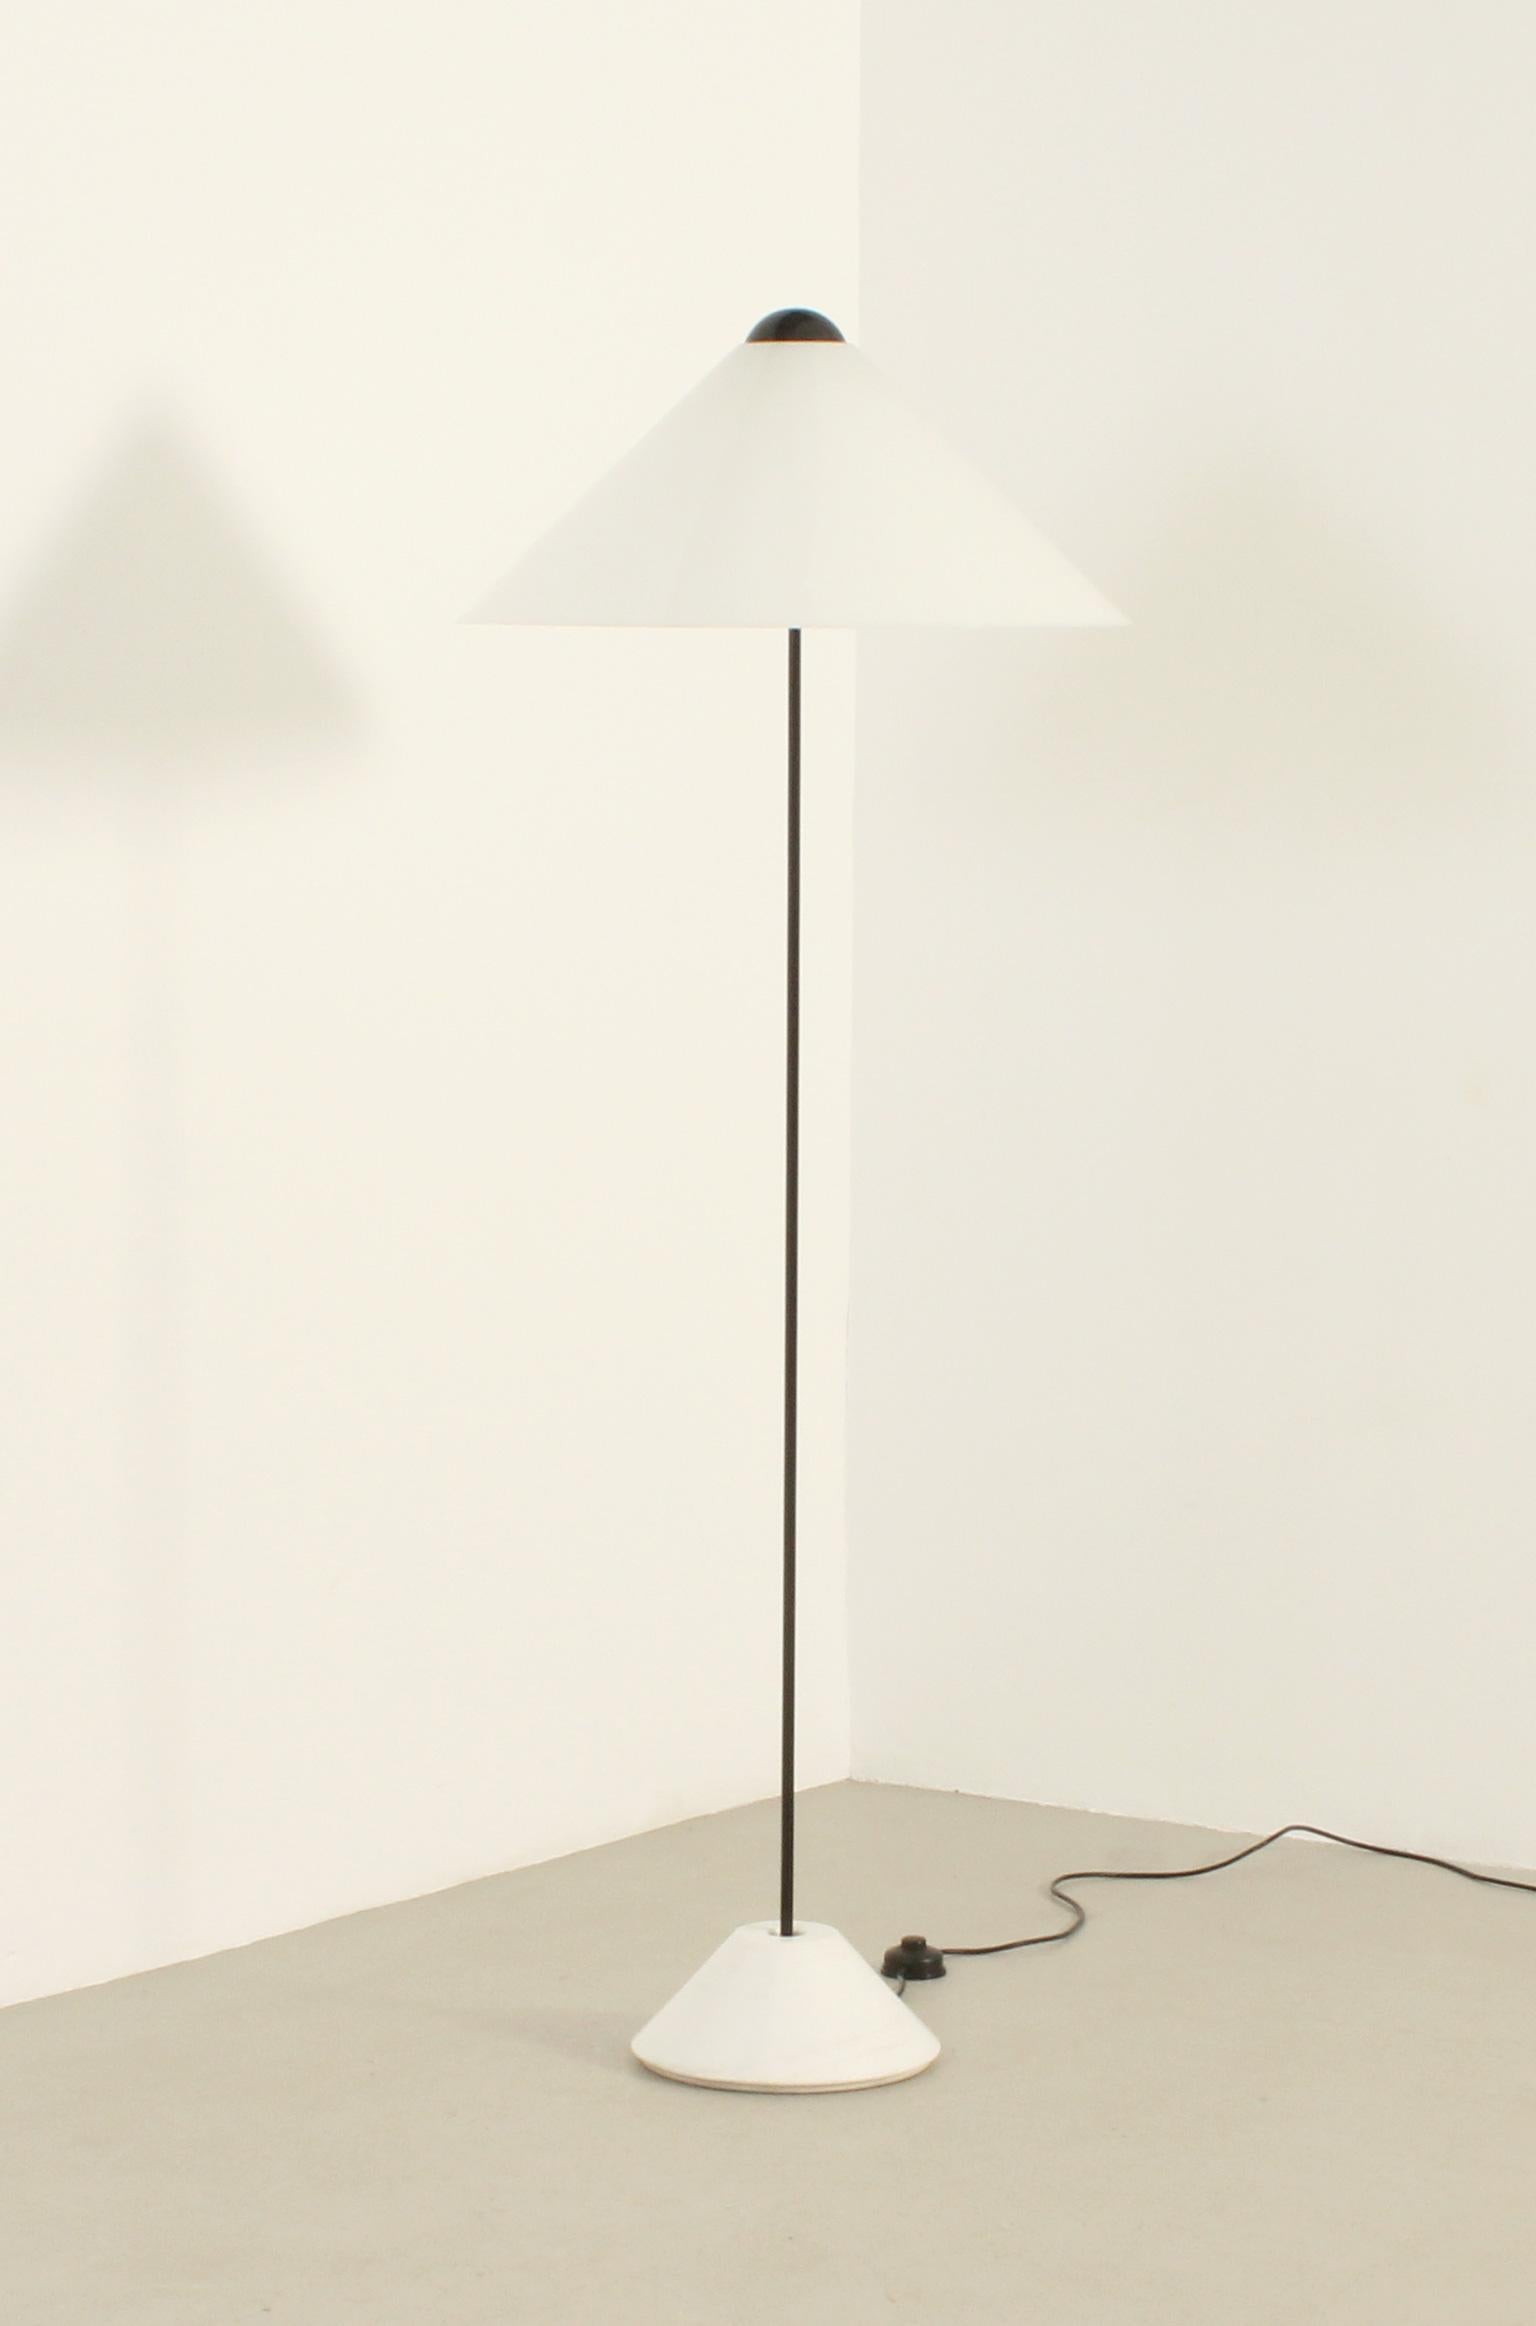 Floor lamp model Snow designed in 1973 by Vico Magistretti for Oluce, Italy. Black metal stem with Carrara marble base and white acrylic shade. Early edition with the conical marble base.